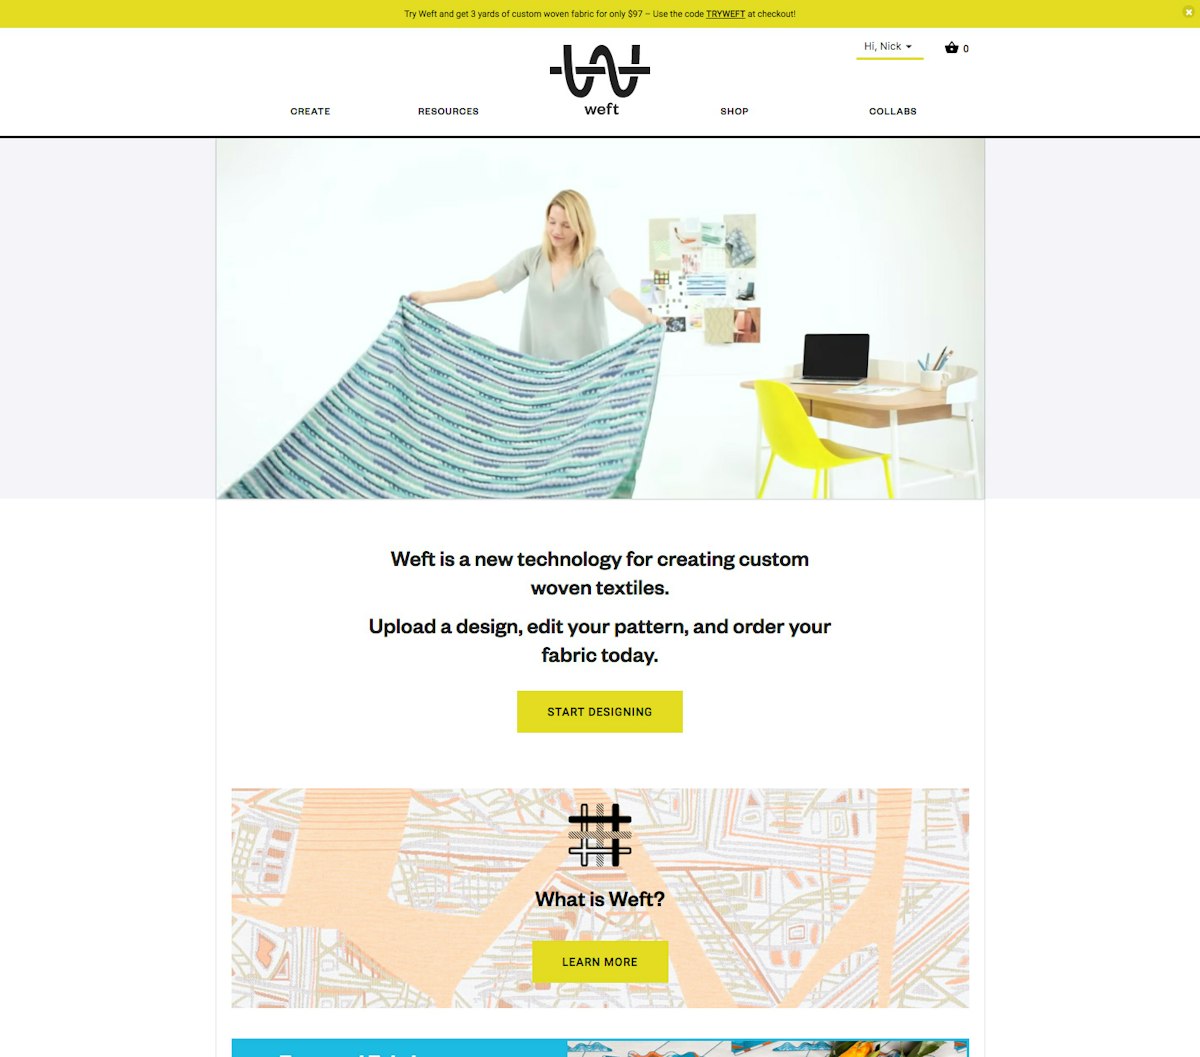 The Weft home page